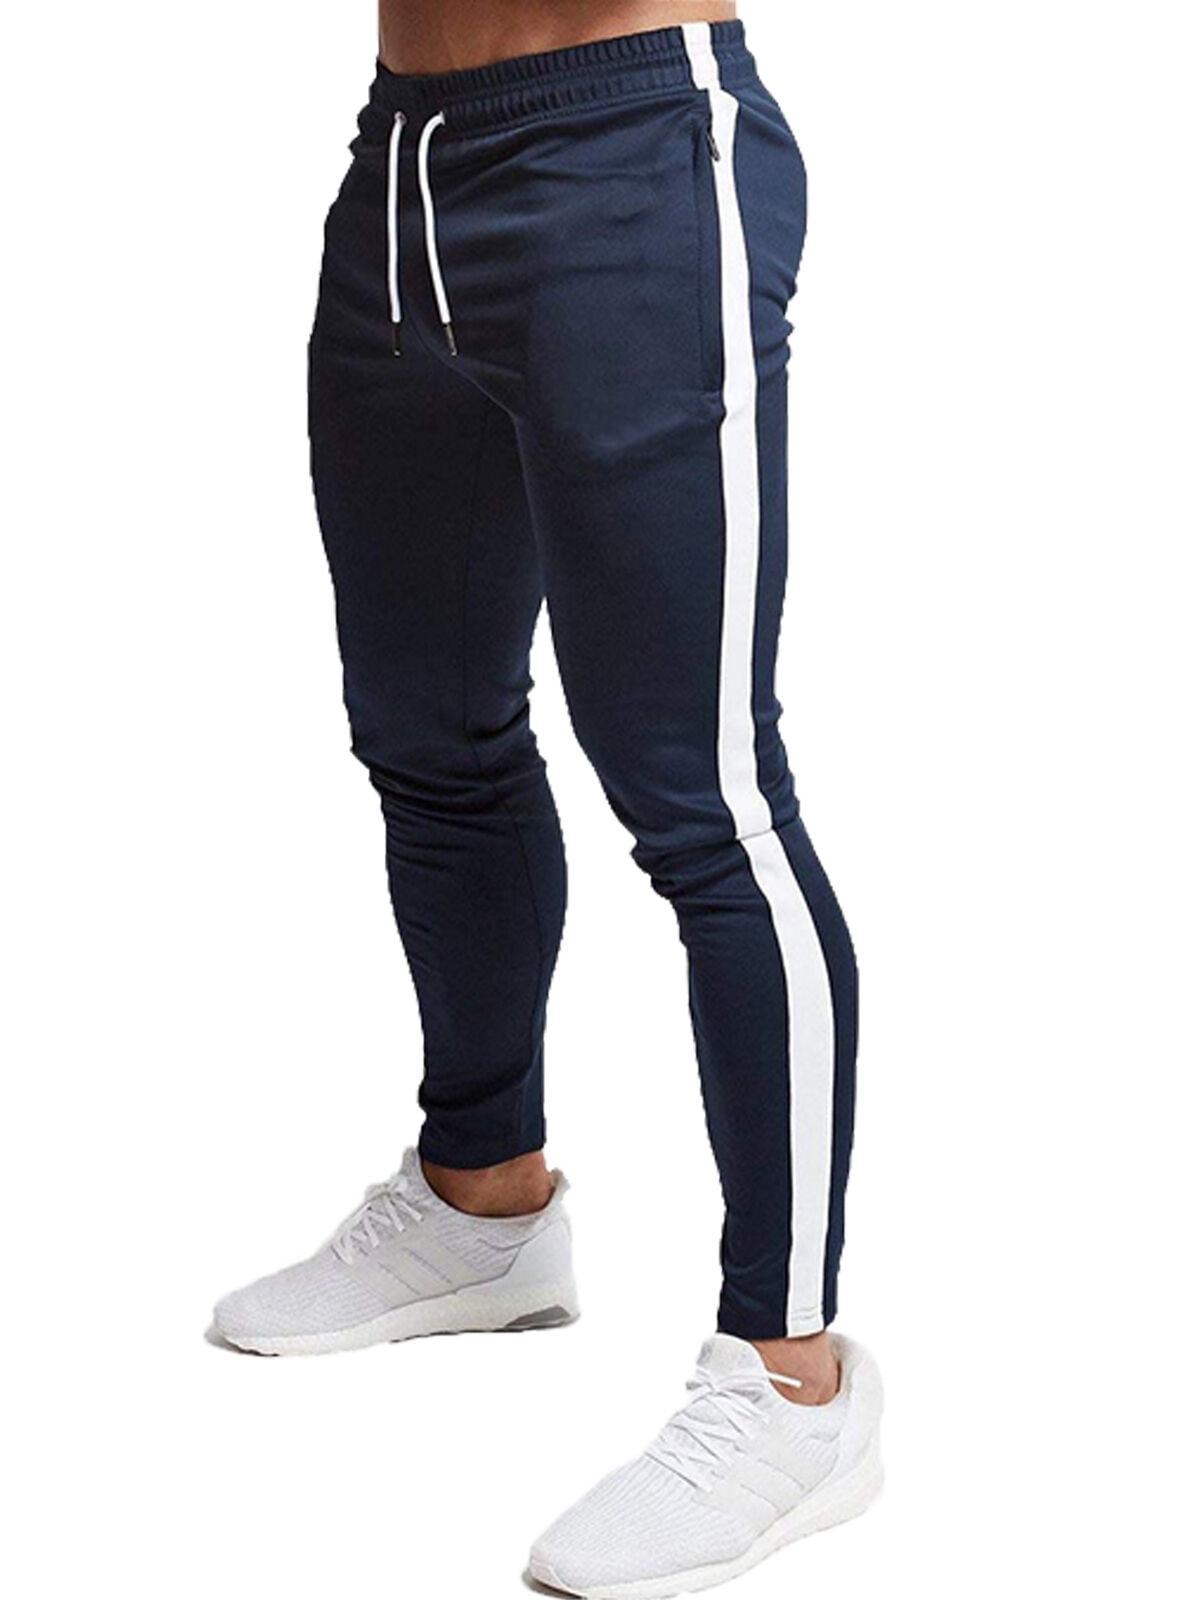 Diconna - Mens Sport Gym Pants Slim Fit Running Joggers Casual Long ...